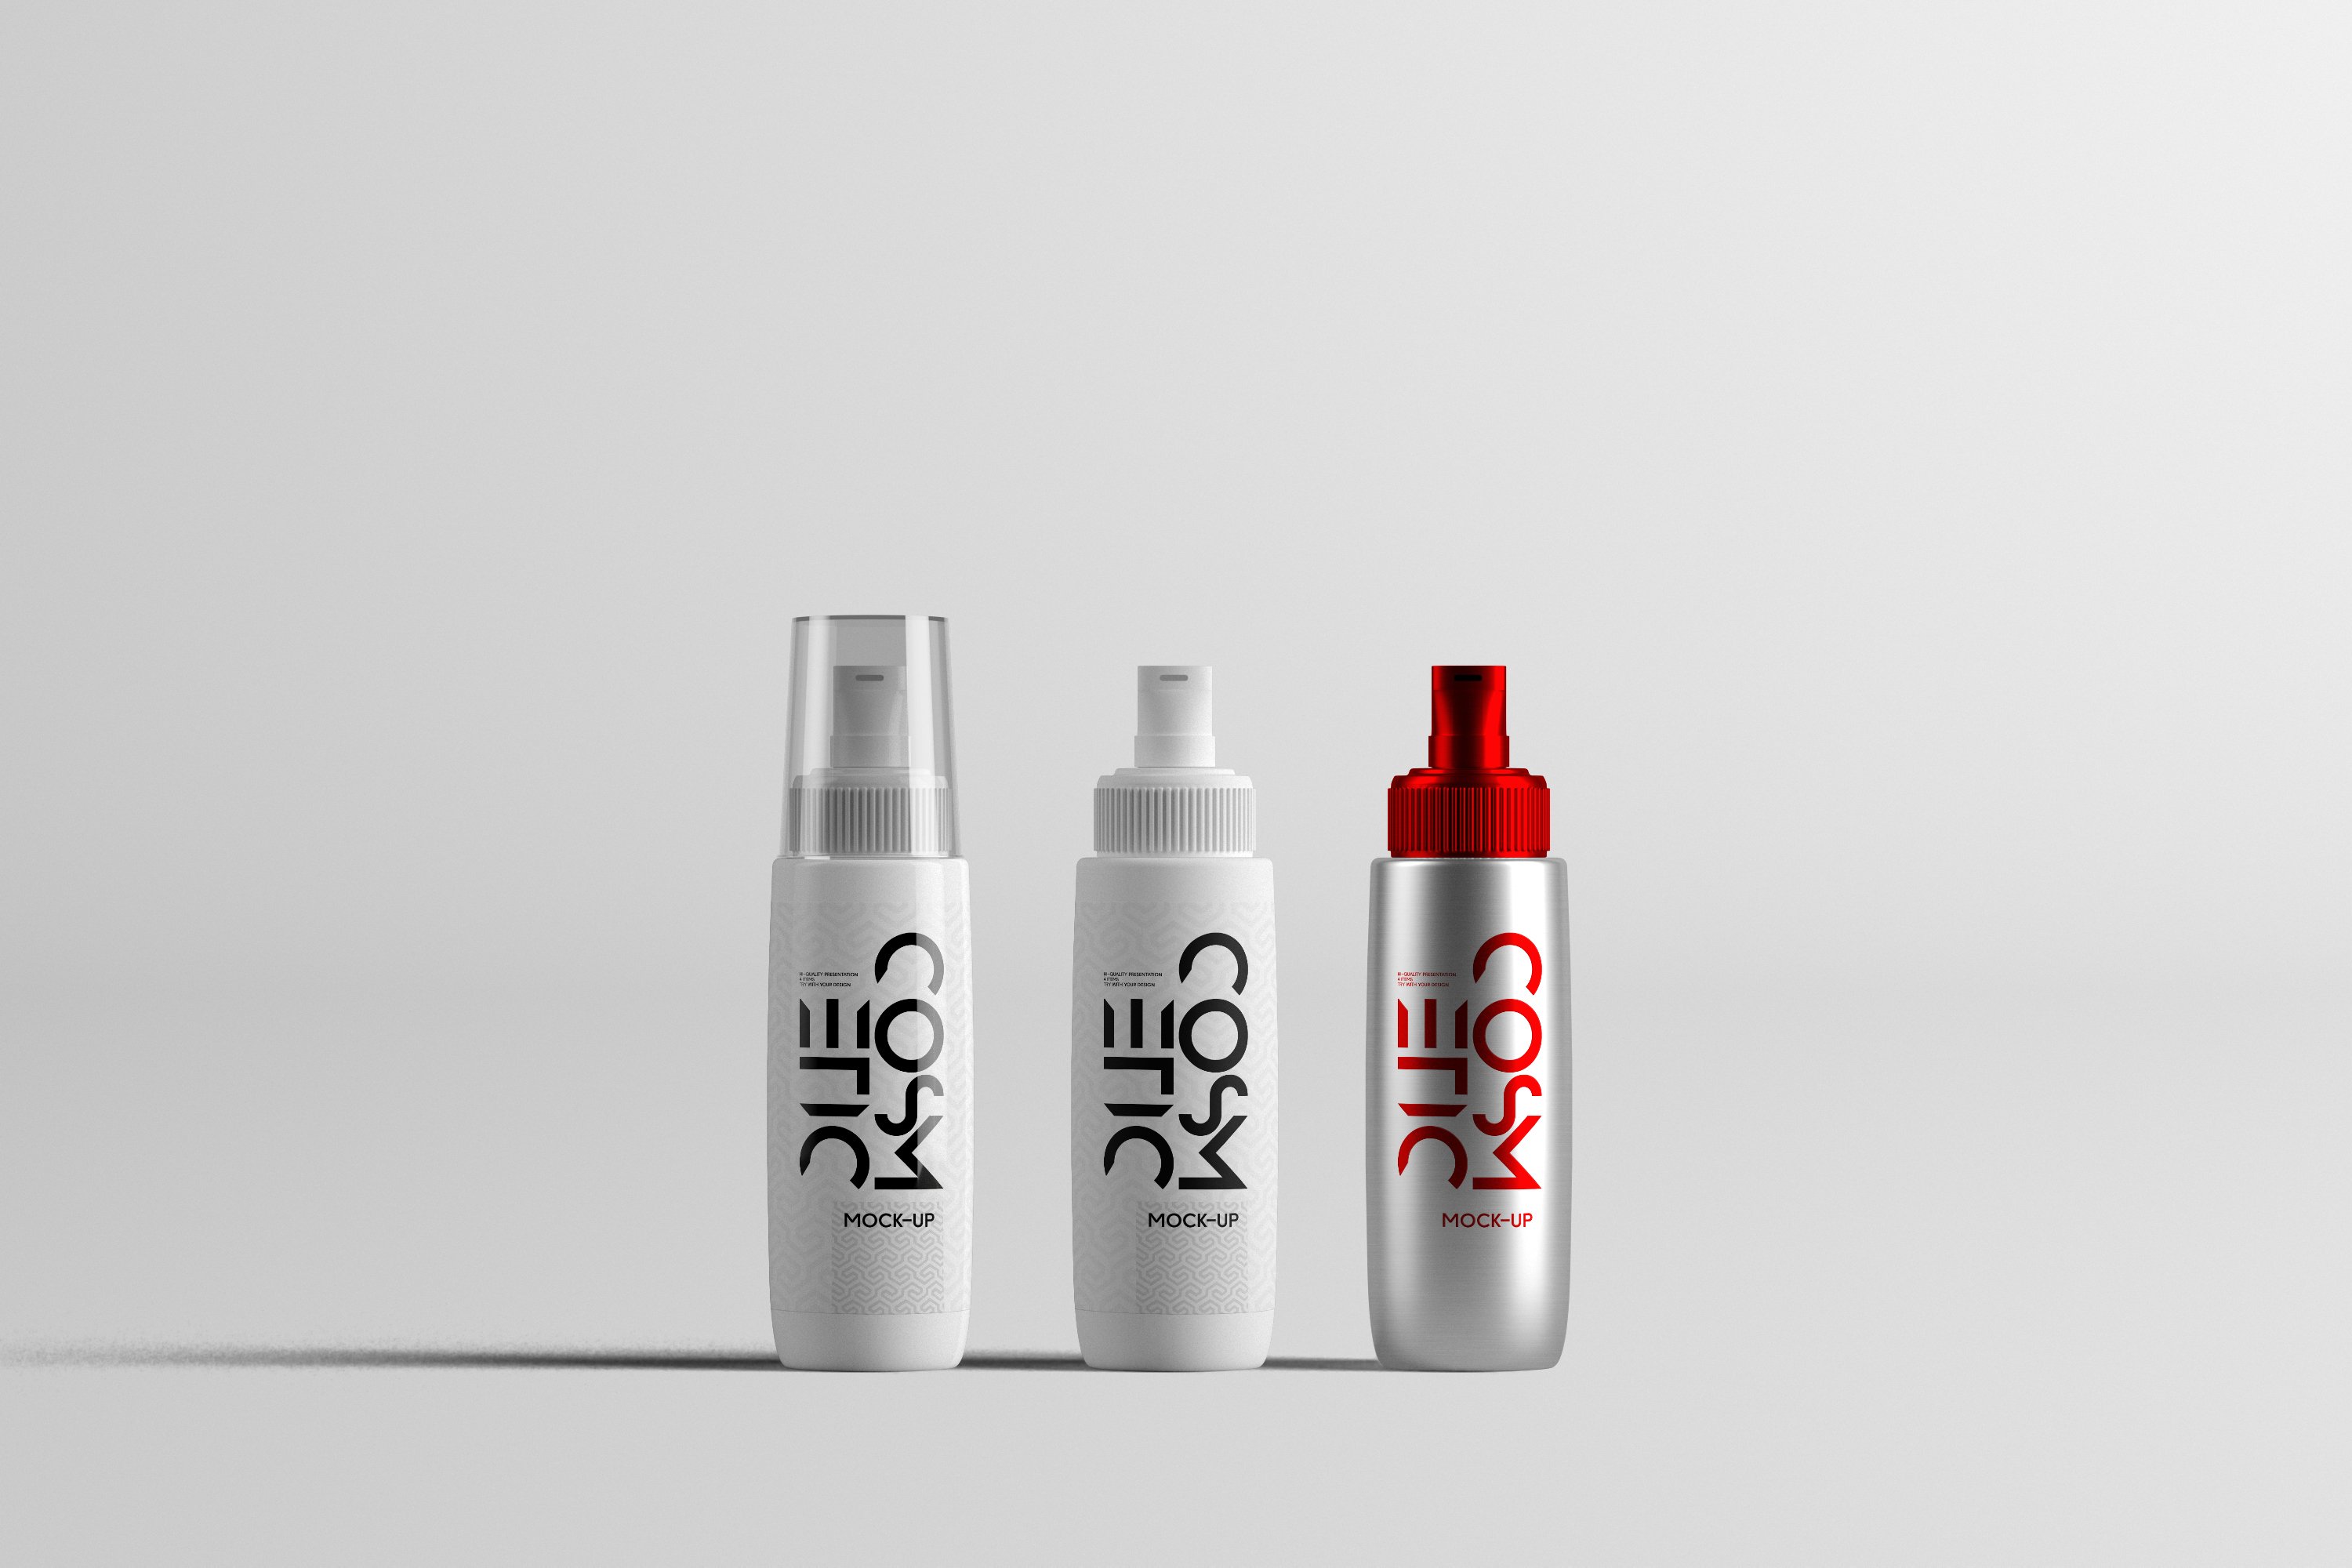 Small cosmetic bottles for your travel.